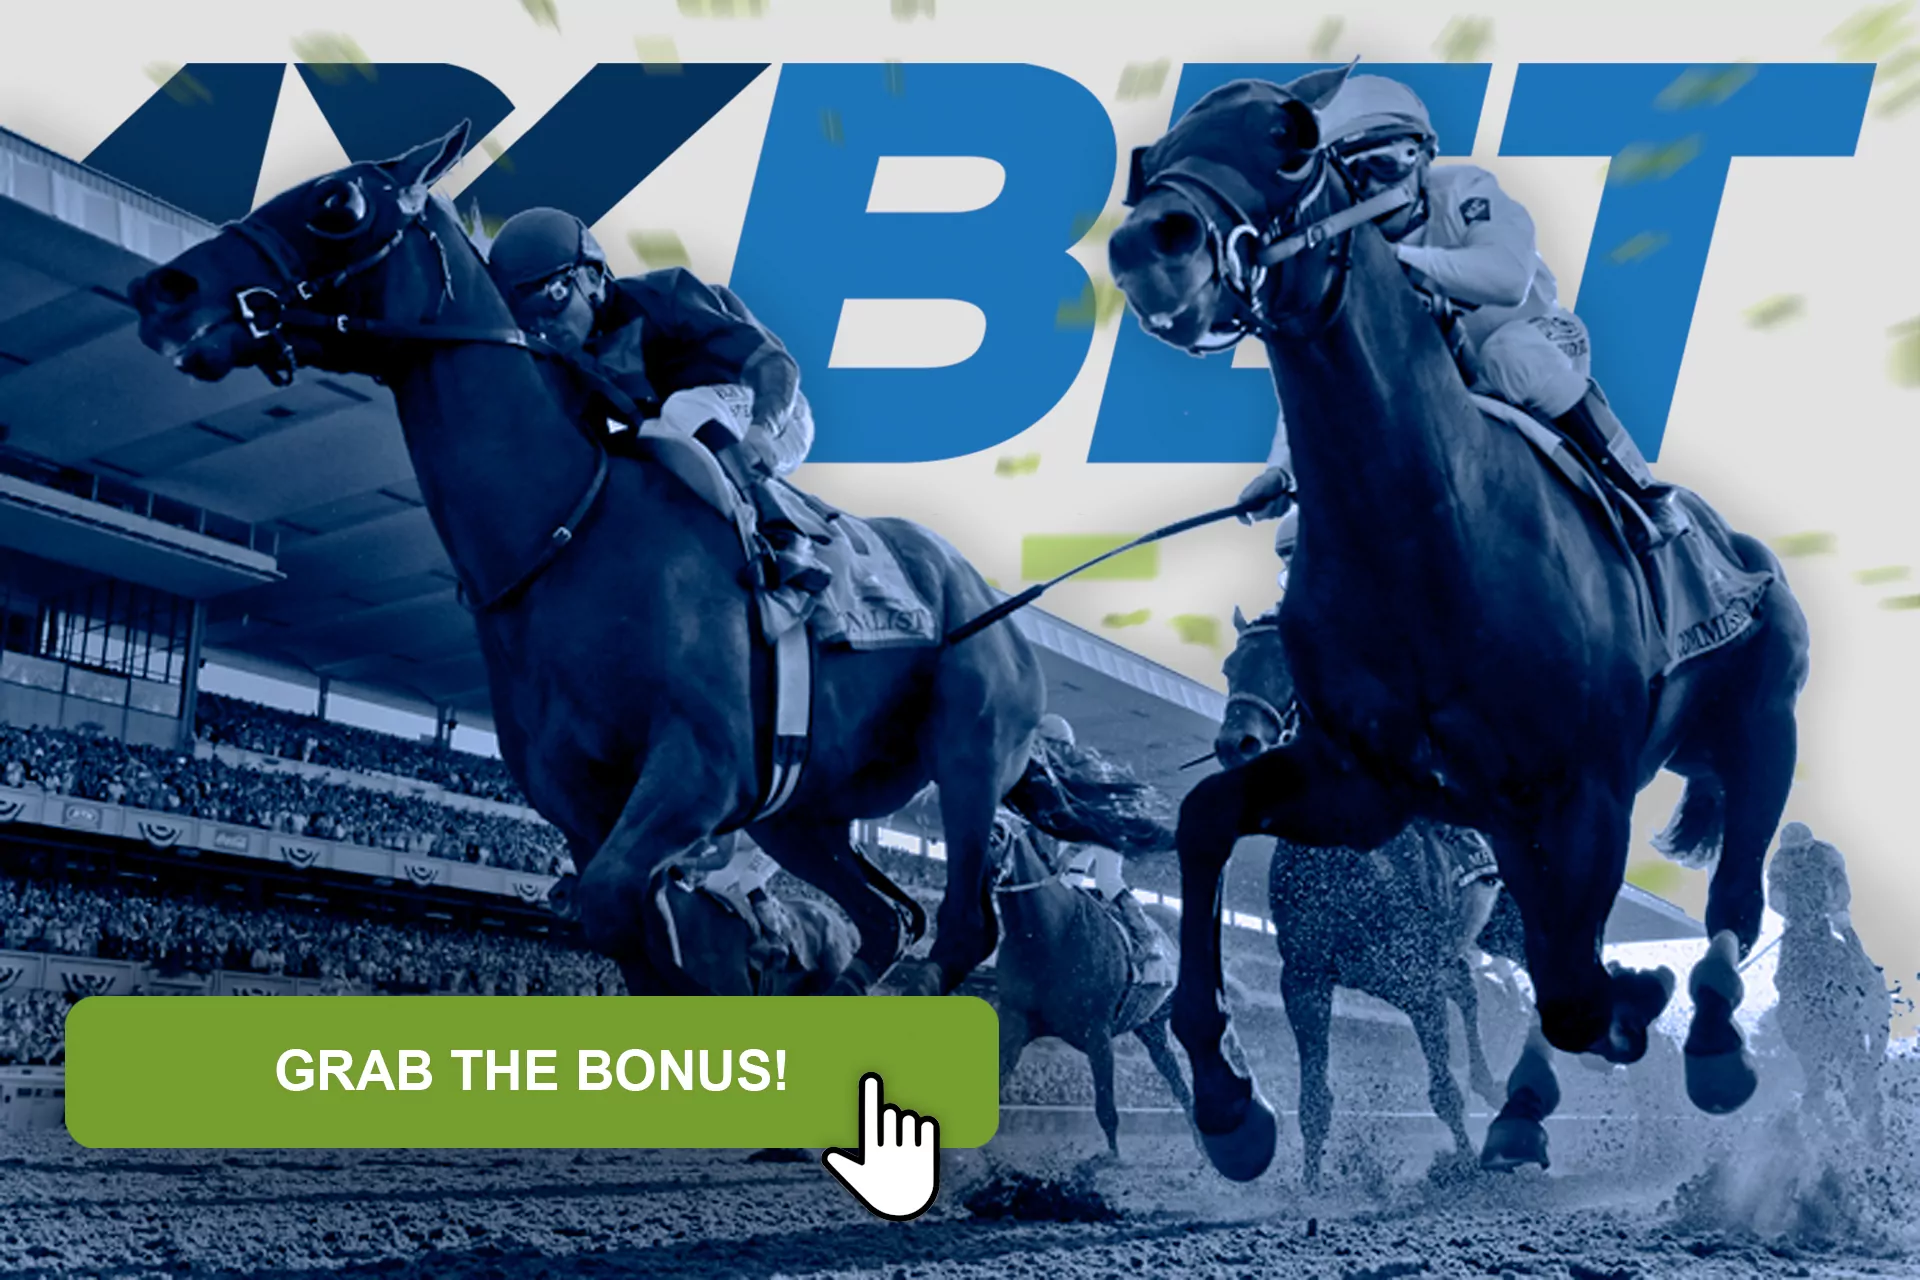 For new users of 1xBet, there is a welcome offer of a 10000 INR bonus.